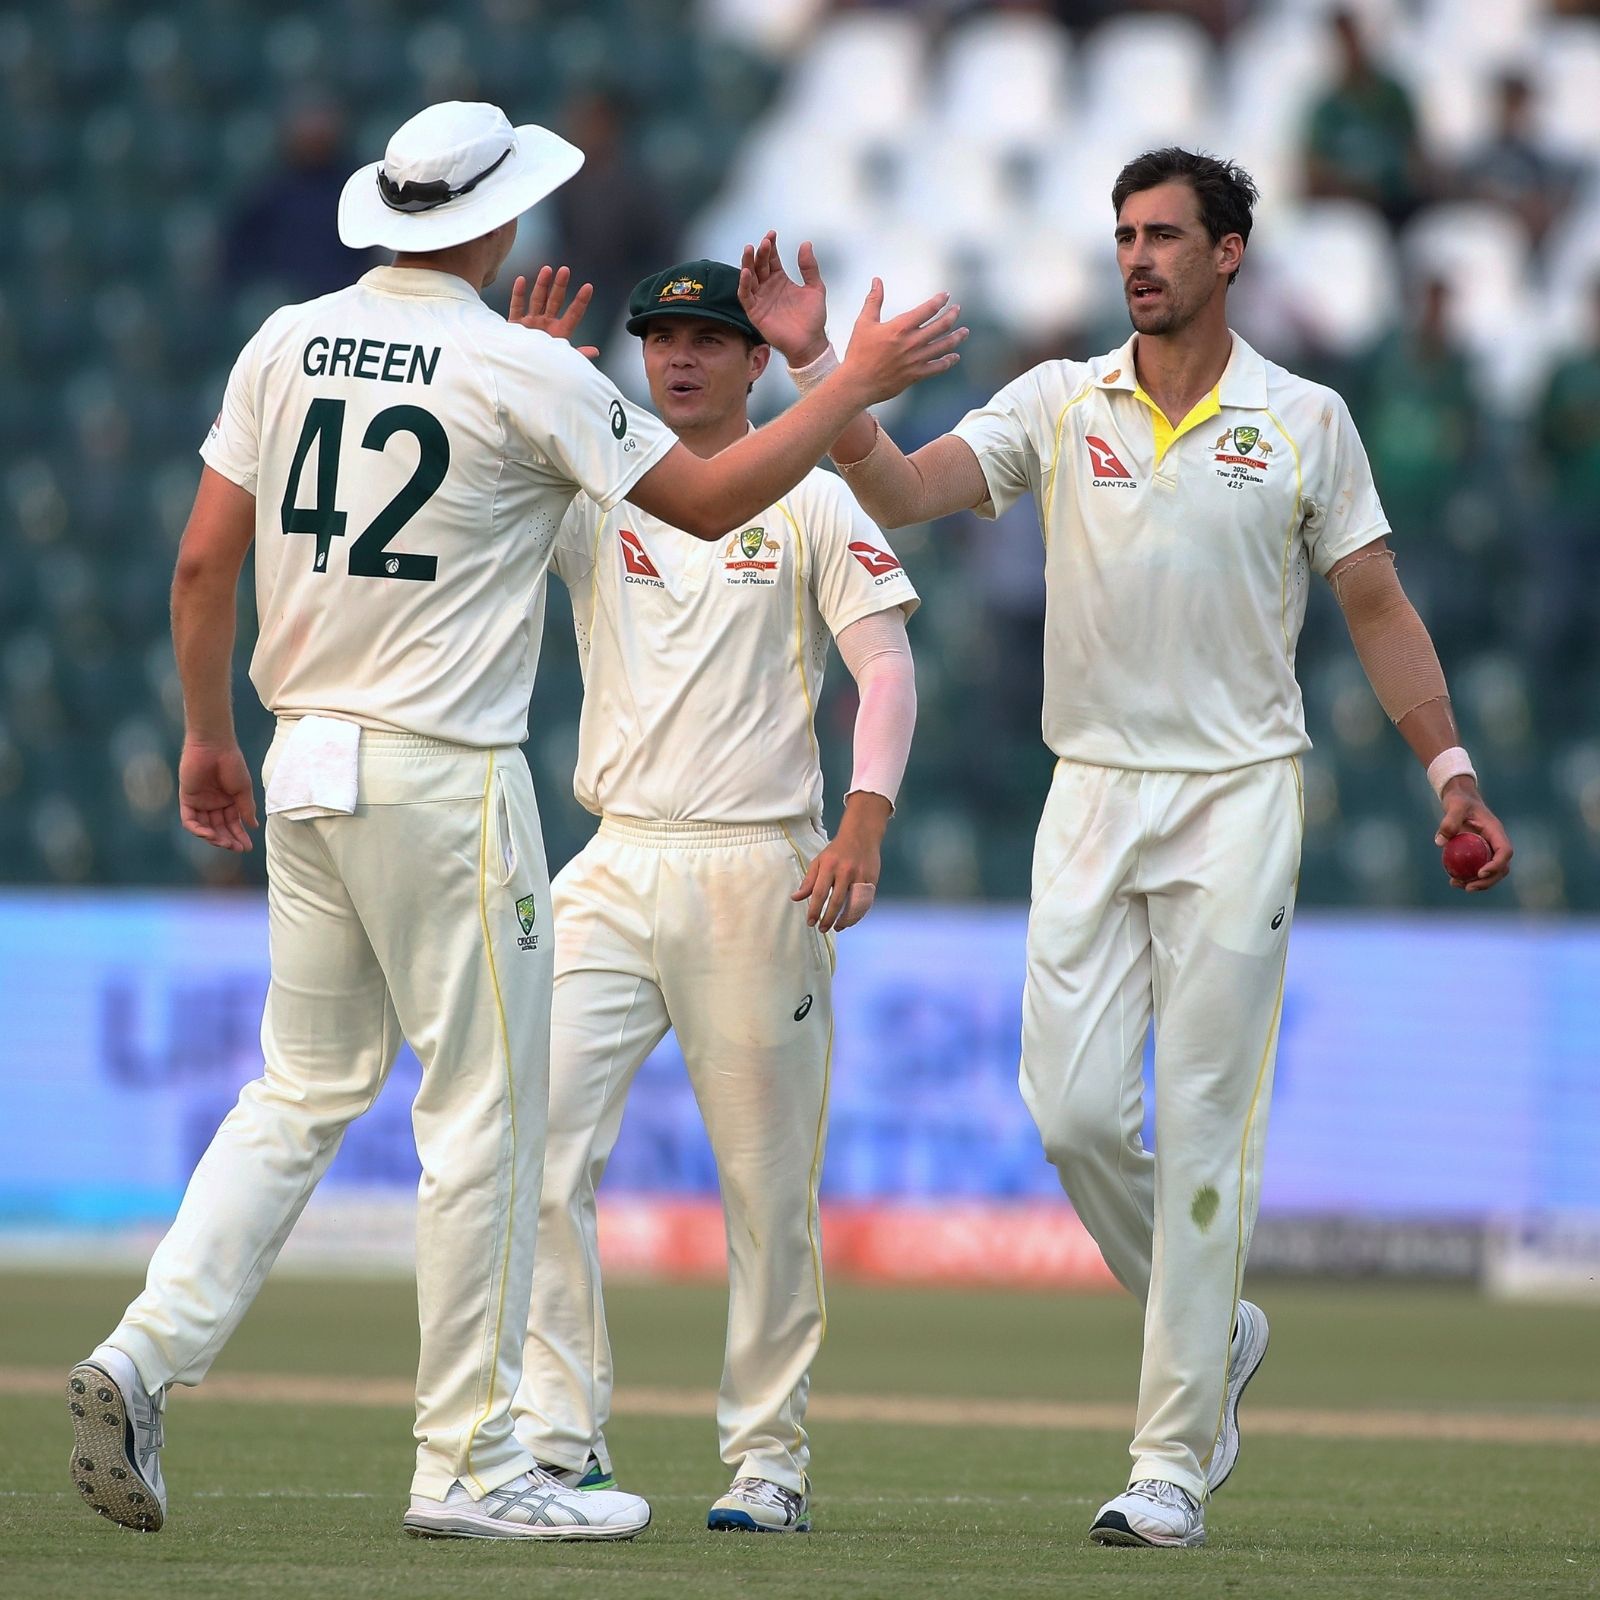 LIVE Pakistan vs Australia, 3rd Test, Day 4 at Gaddafi Stadium in Lahore Latest Updates, Scorecard and Commentary